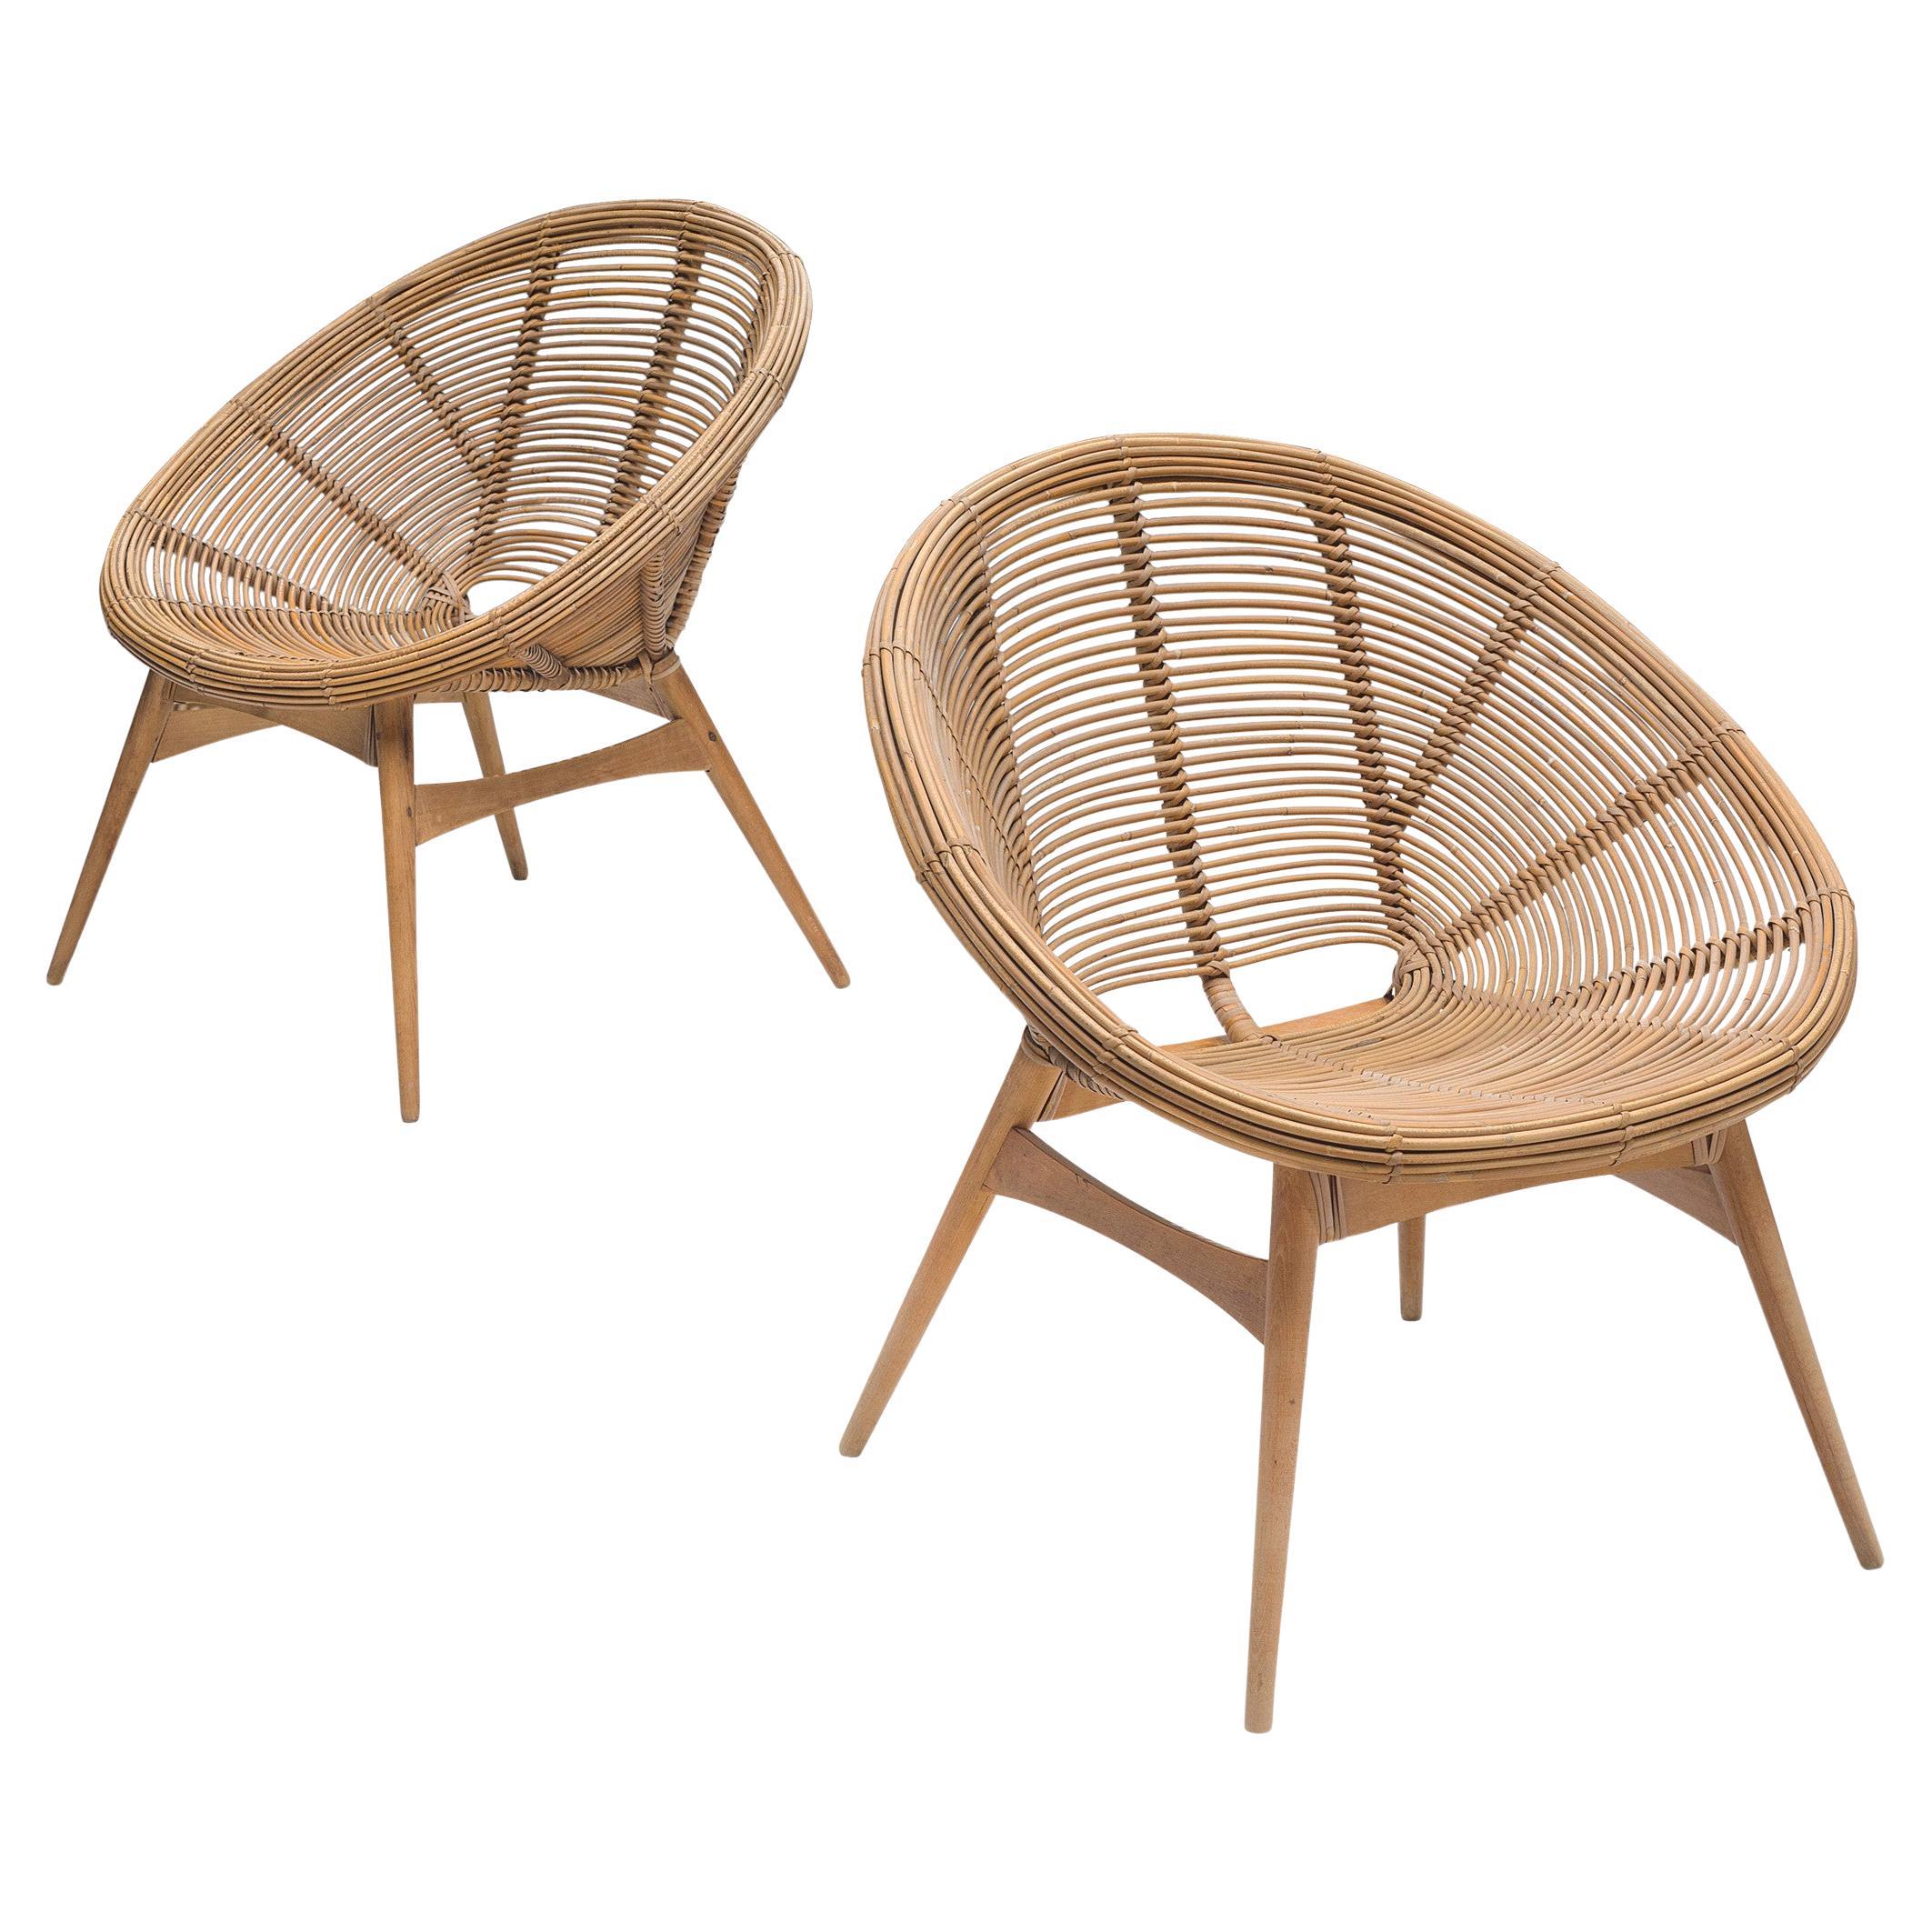 What is a round wicker chair called?